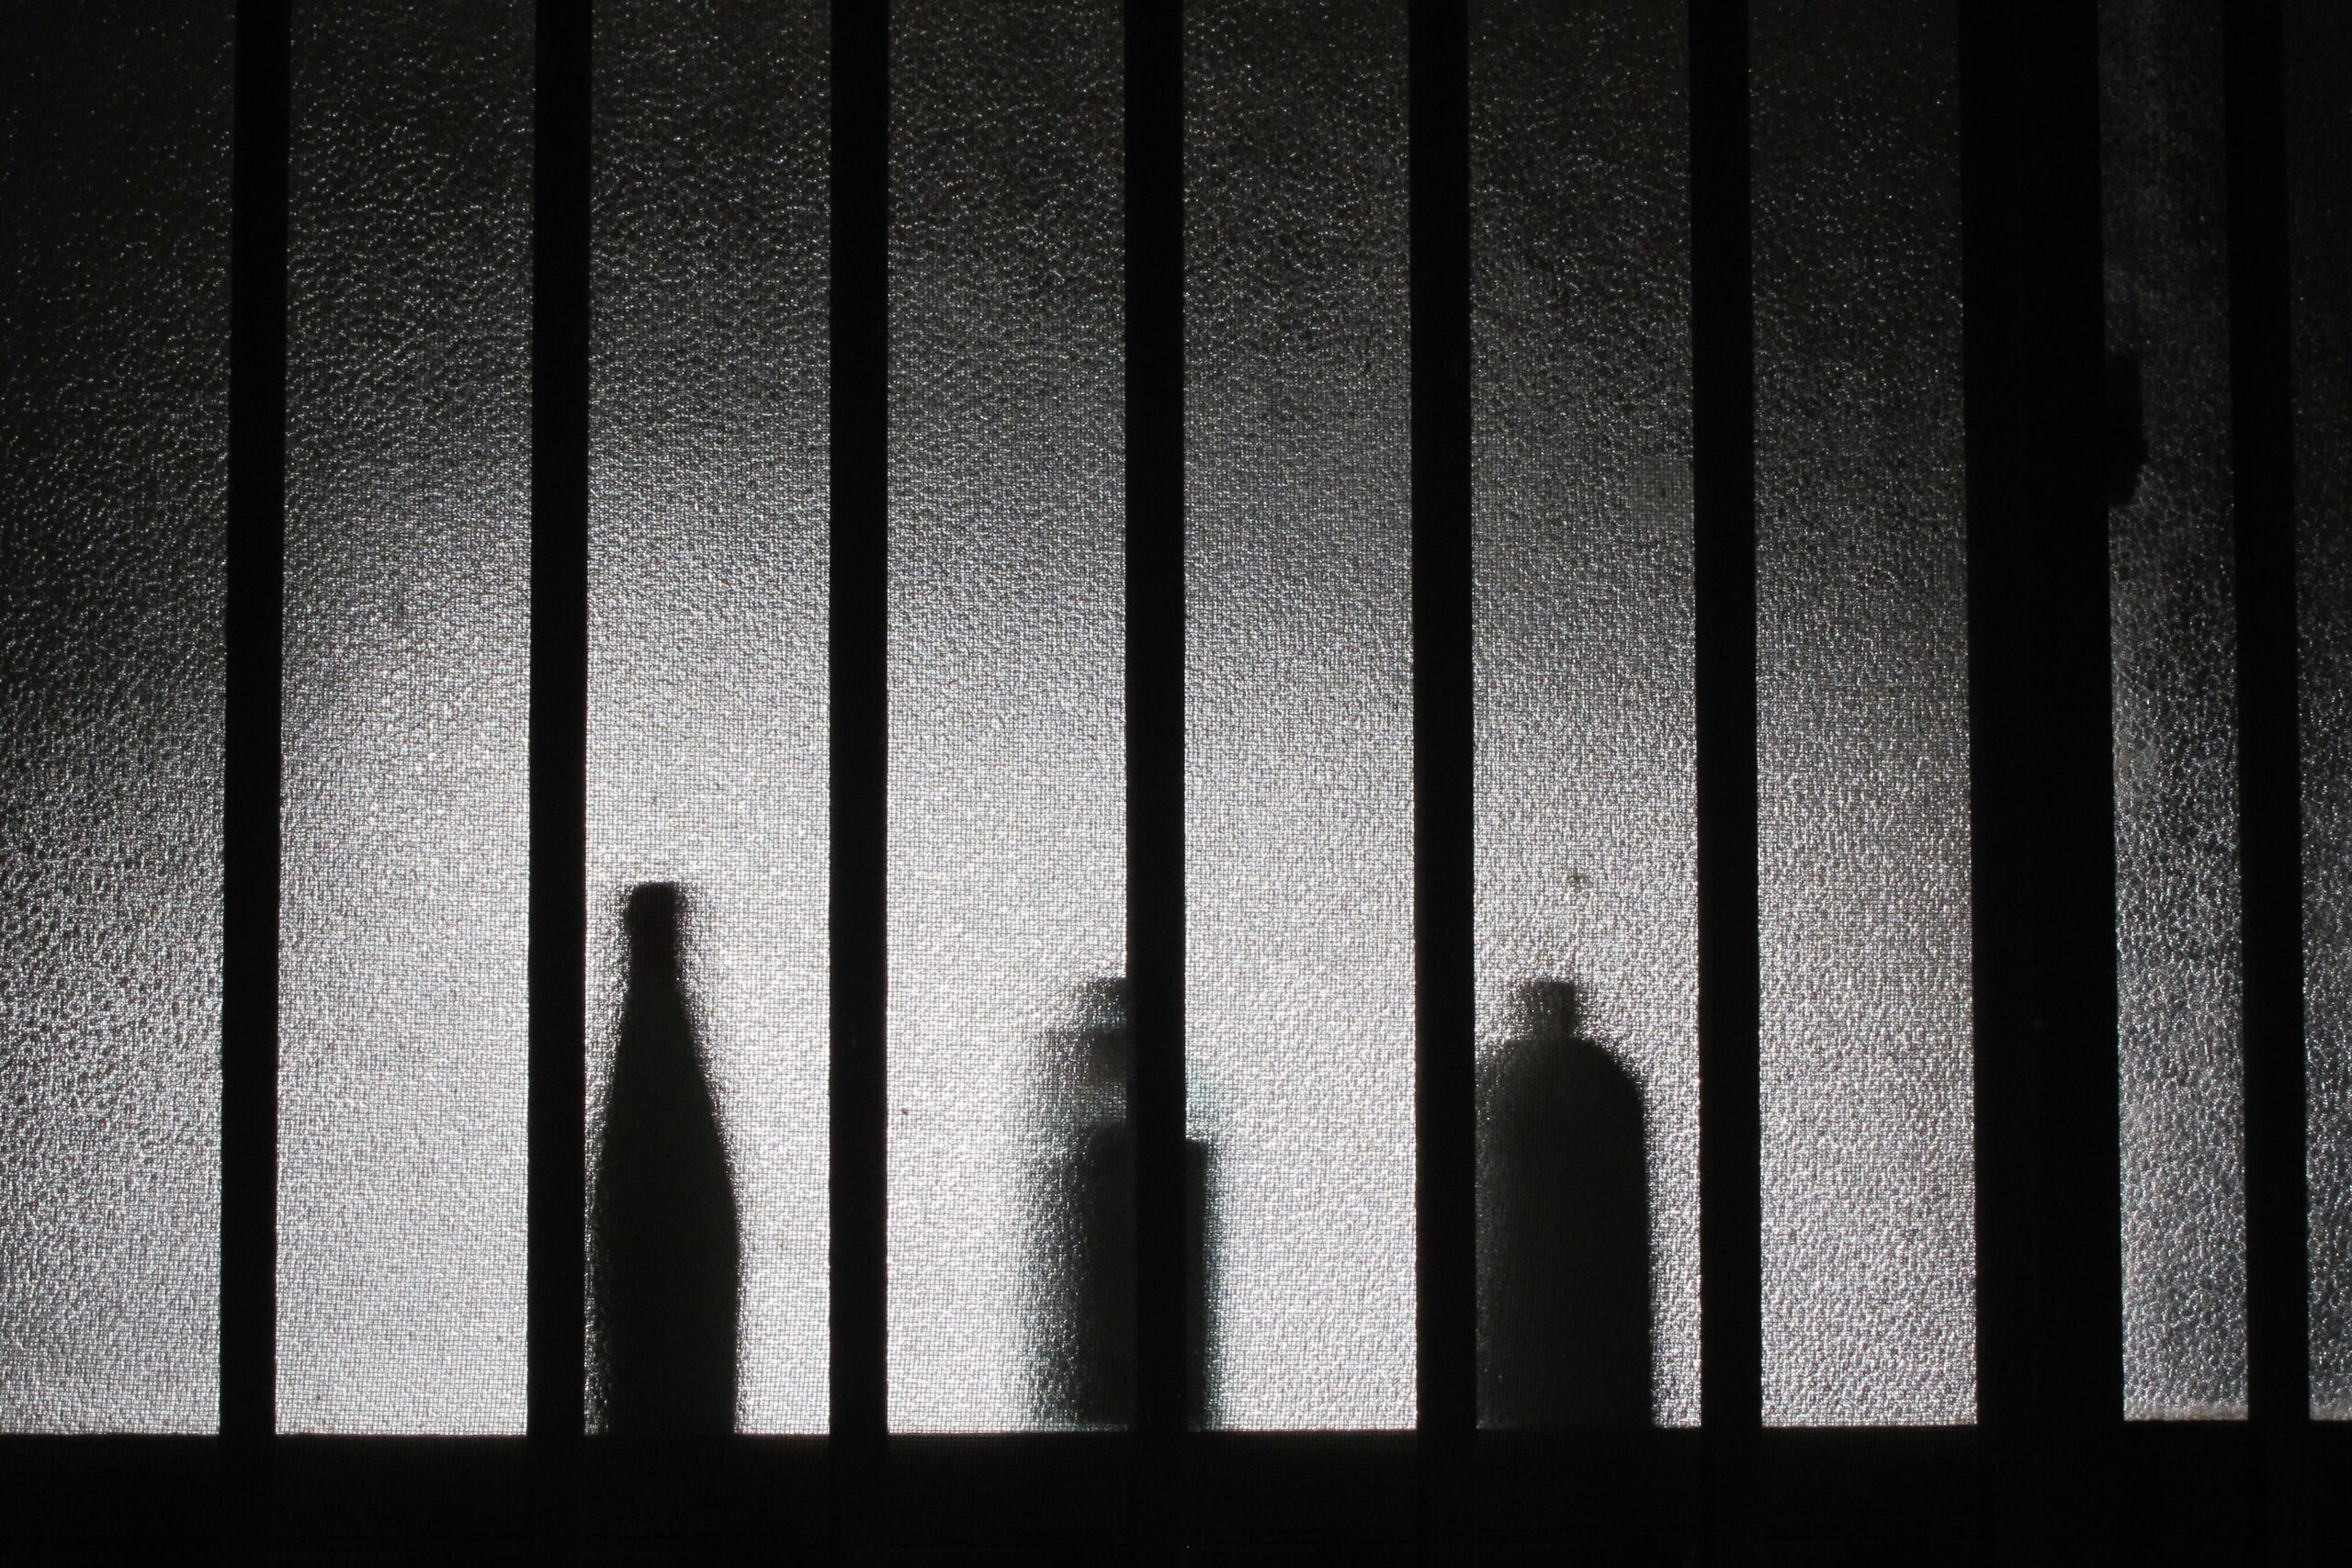 Silhouette of bottles through a frosted glass window